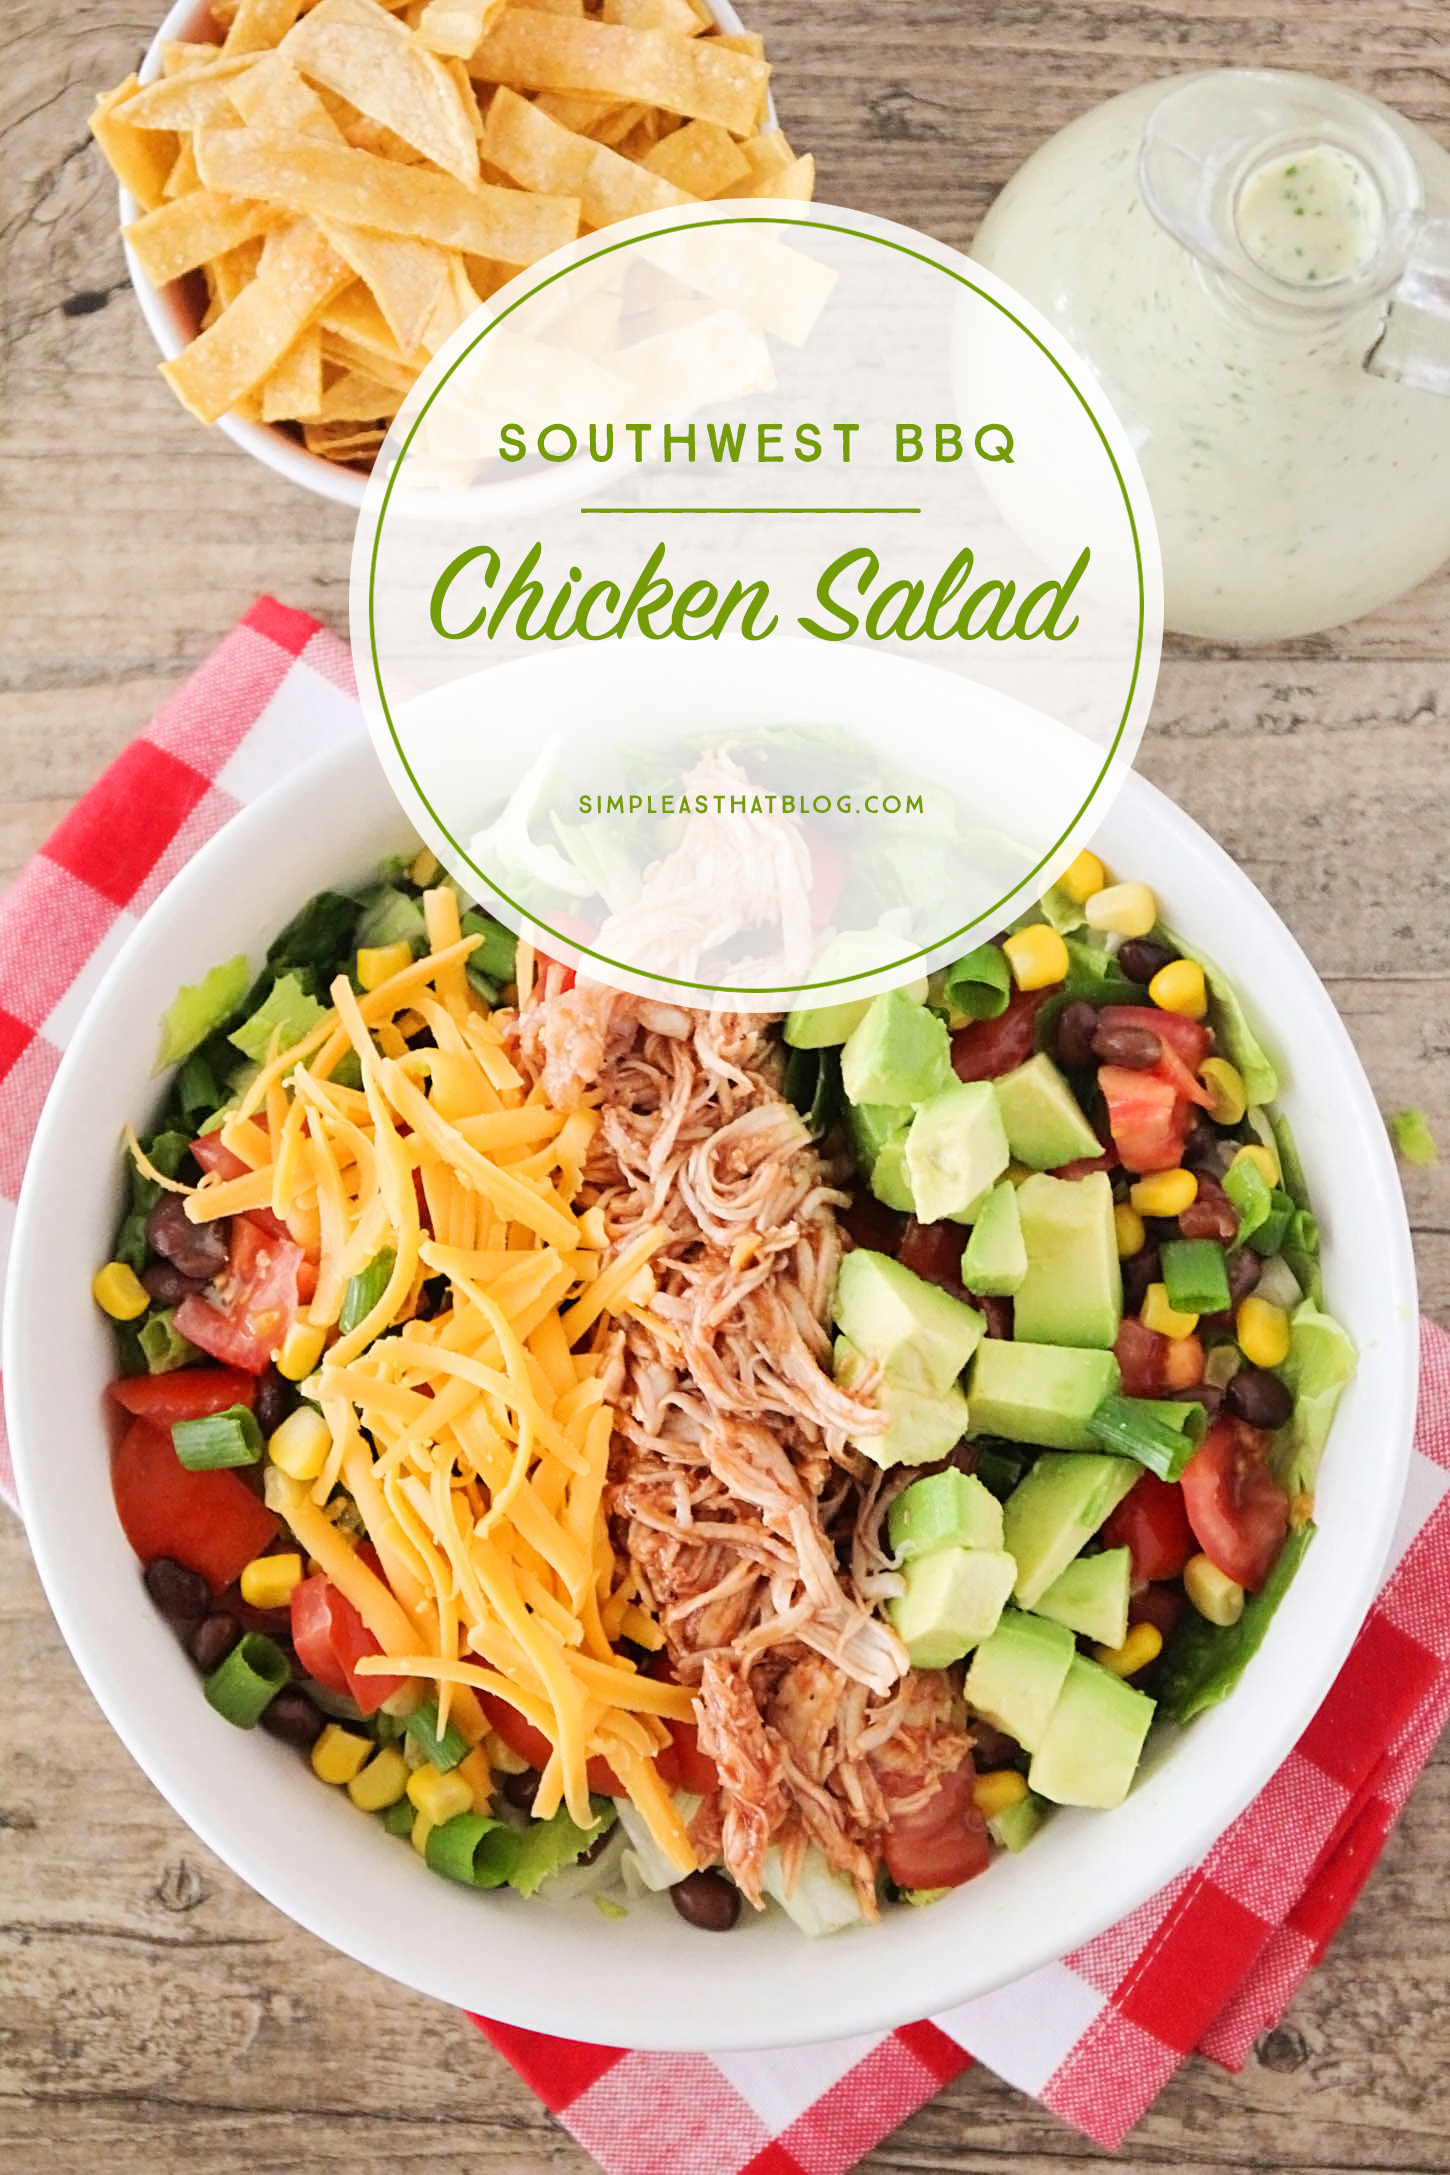 This Southwest BBQ Chicken Salad with Creamy Lime-Cilantro Dressing is a quick dinner option that's full of healthy ingredients and so packed with flavor your family will asking for it again and again!